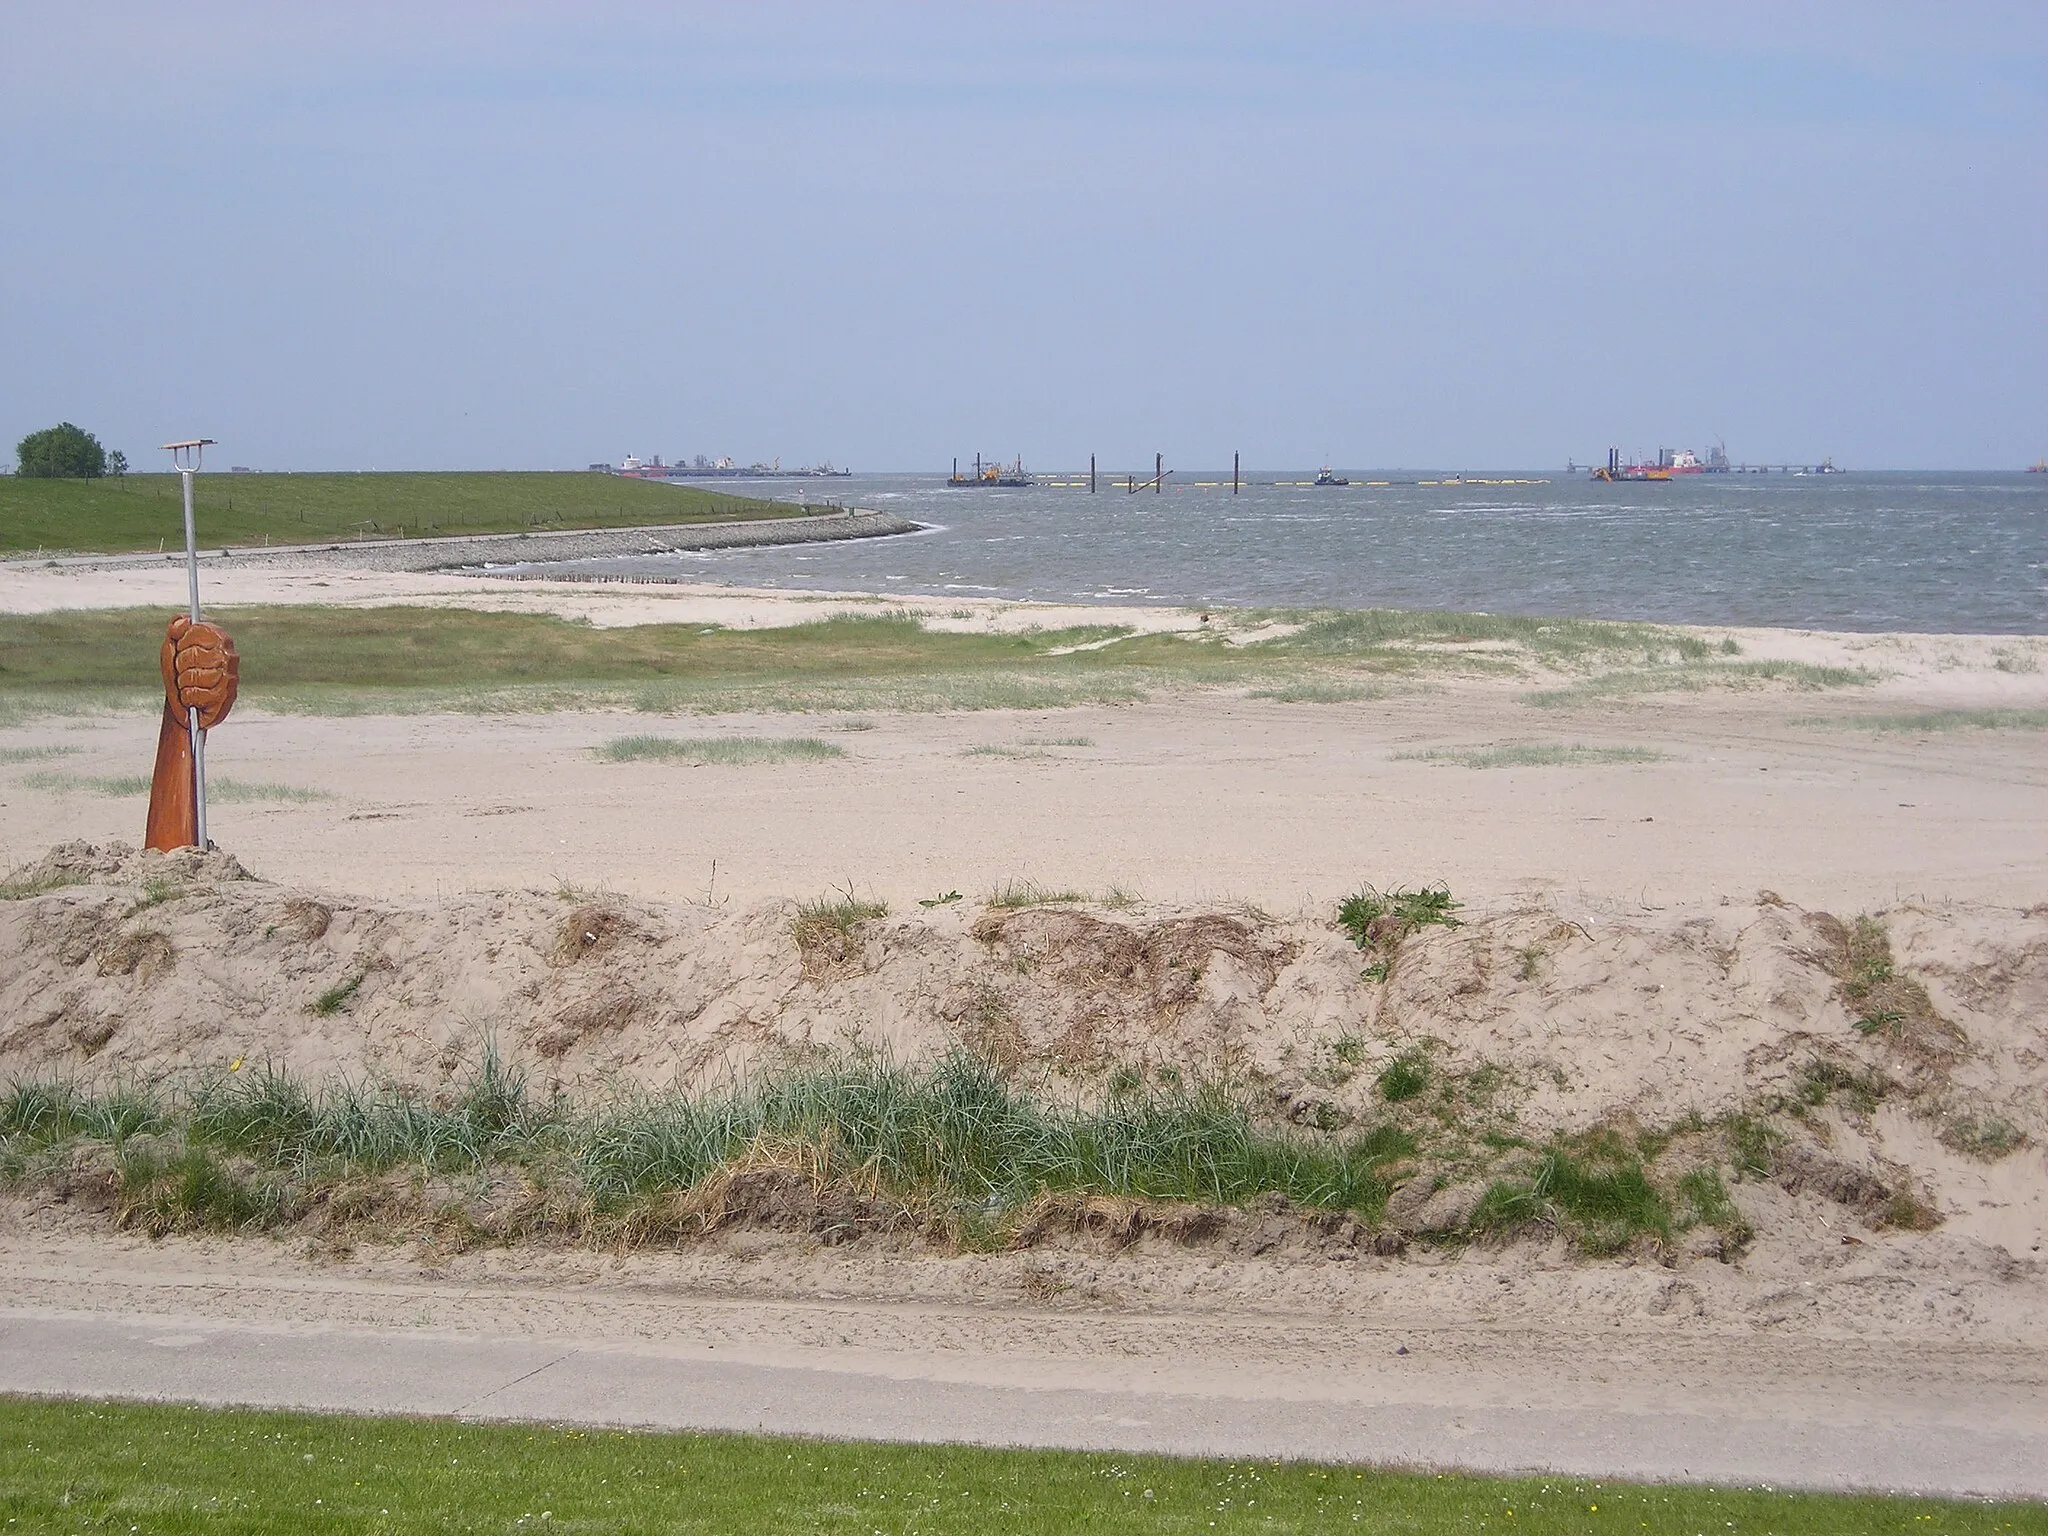 Photo showing: JadeWeserPort construction site at Wilhelmshaven, Germany. In the foreground the Geniusstrand beach with a sign of protest against the JadeWeserPort project (left). In the background floating sand flushing tubes (center) and oil loading terminals (left and right)